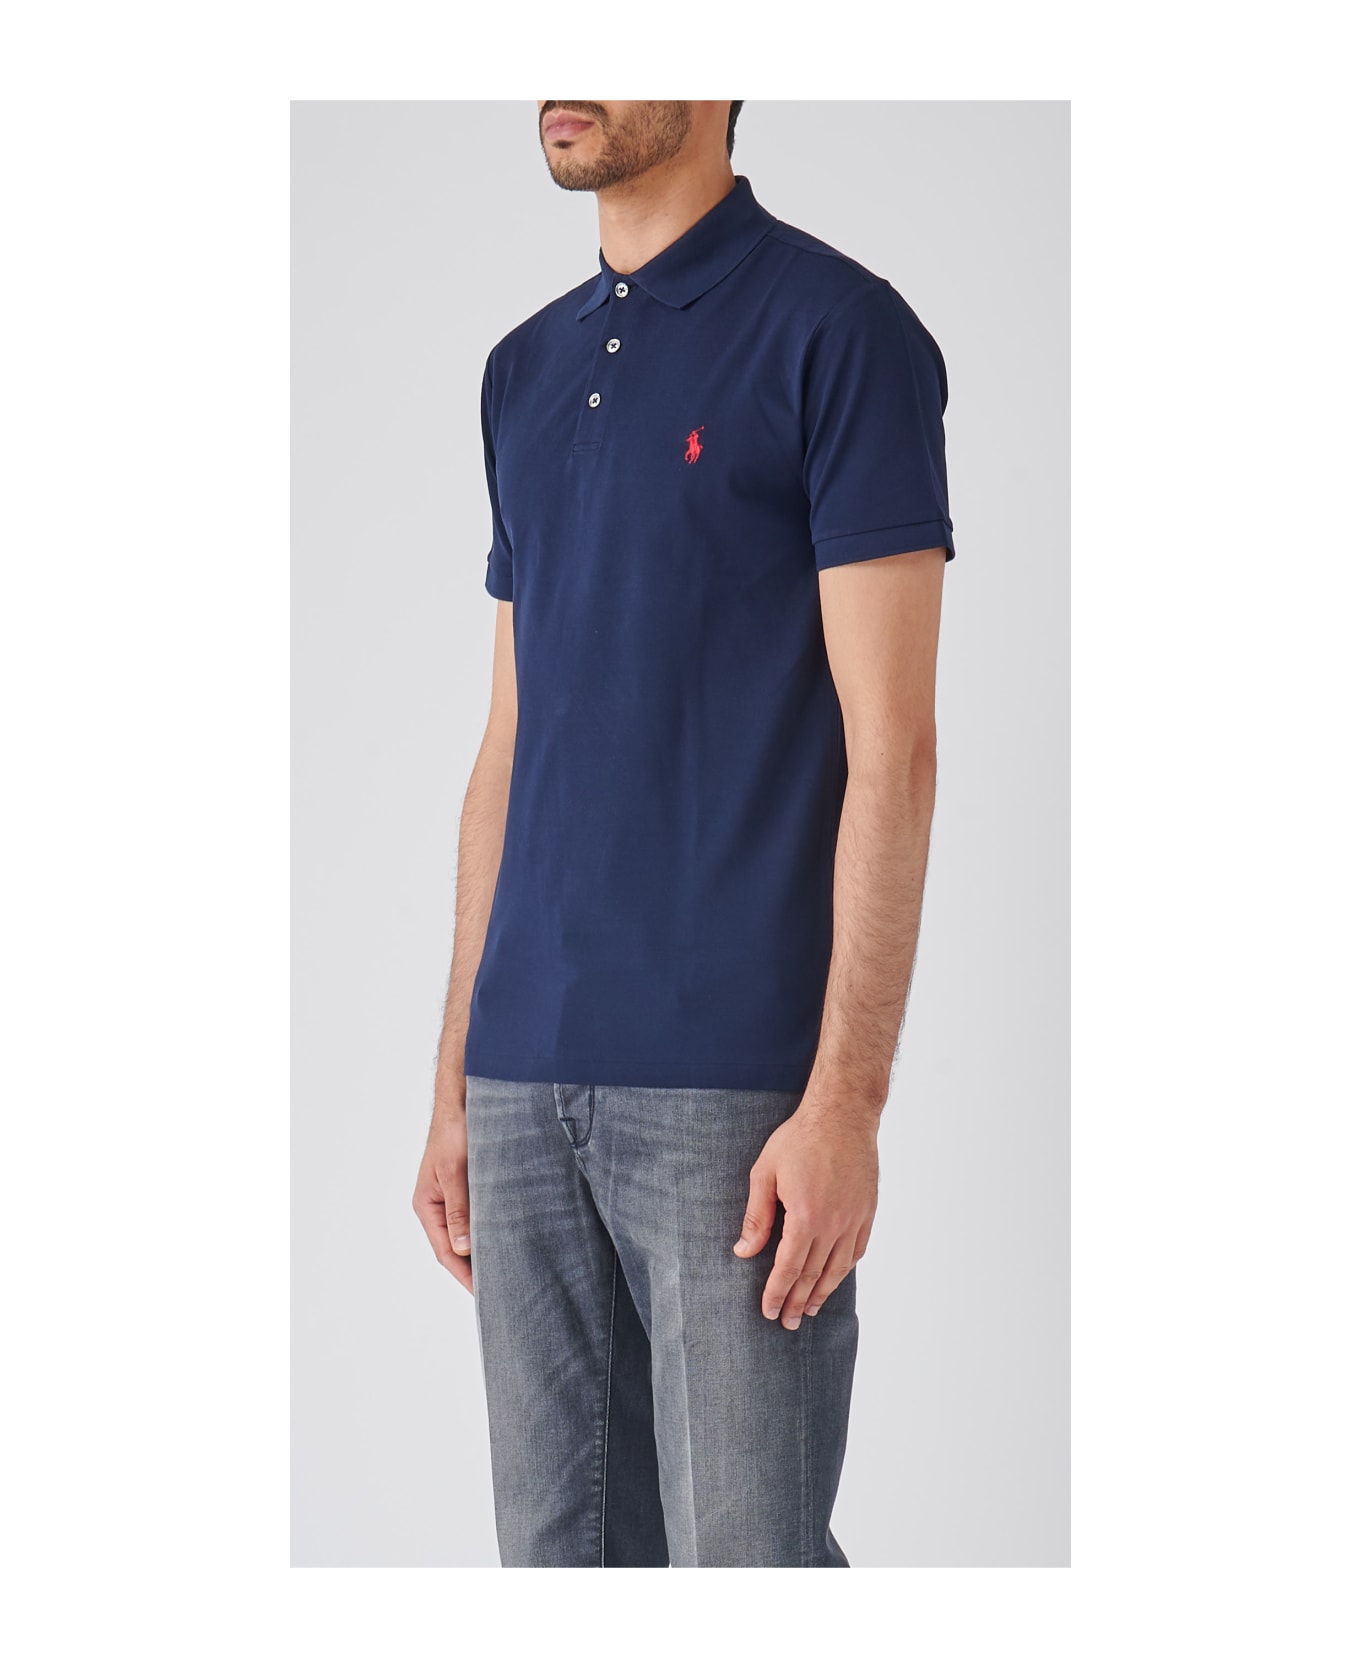 Polo Ralph Lauren Dark Blue Slim Fit Polo Shirt With Contrasting Pony - Blue